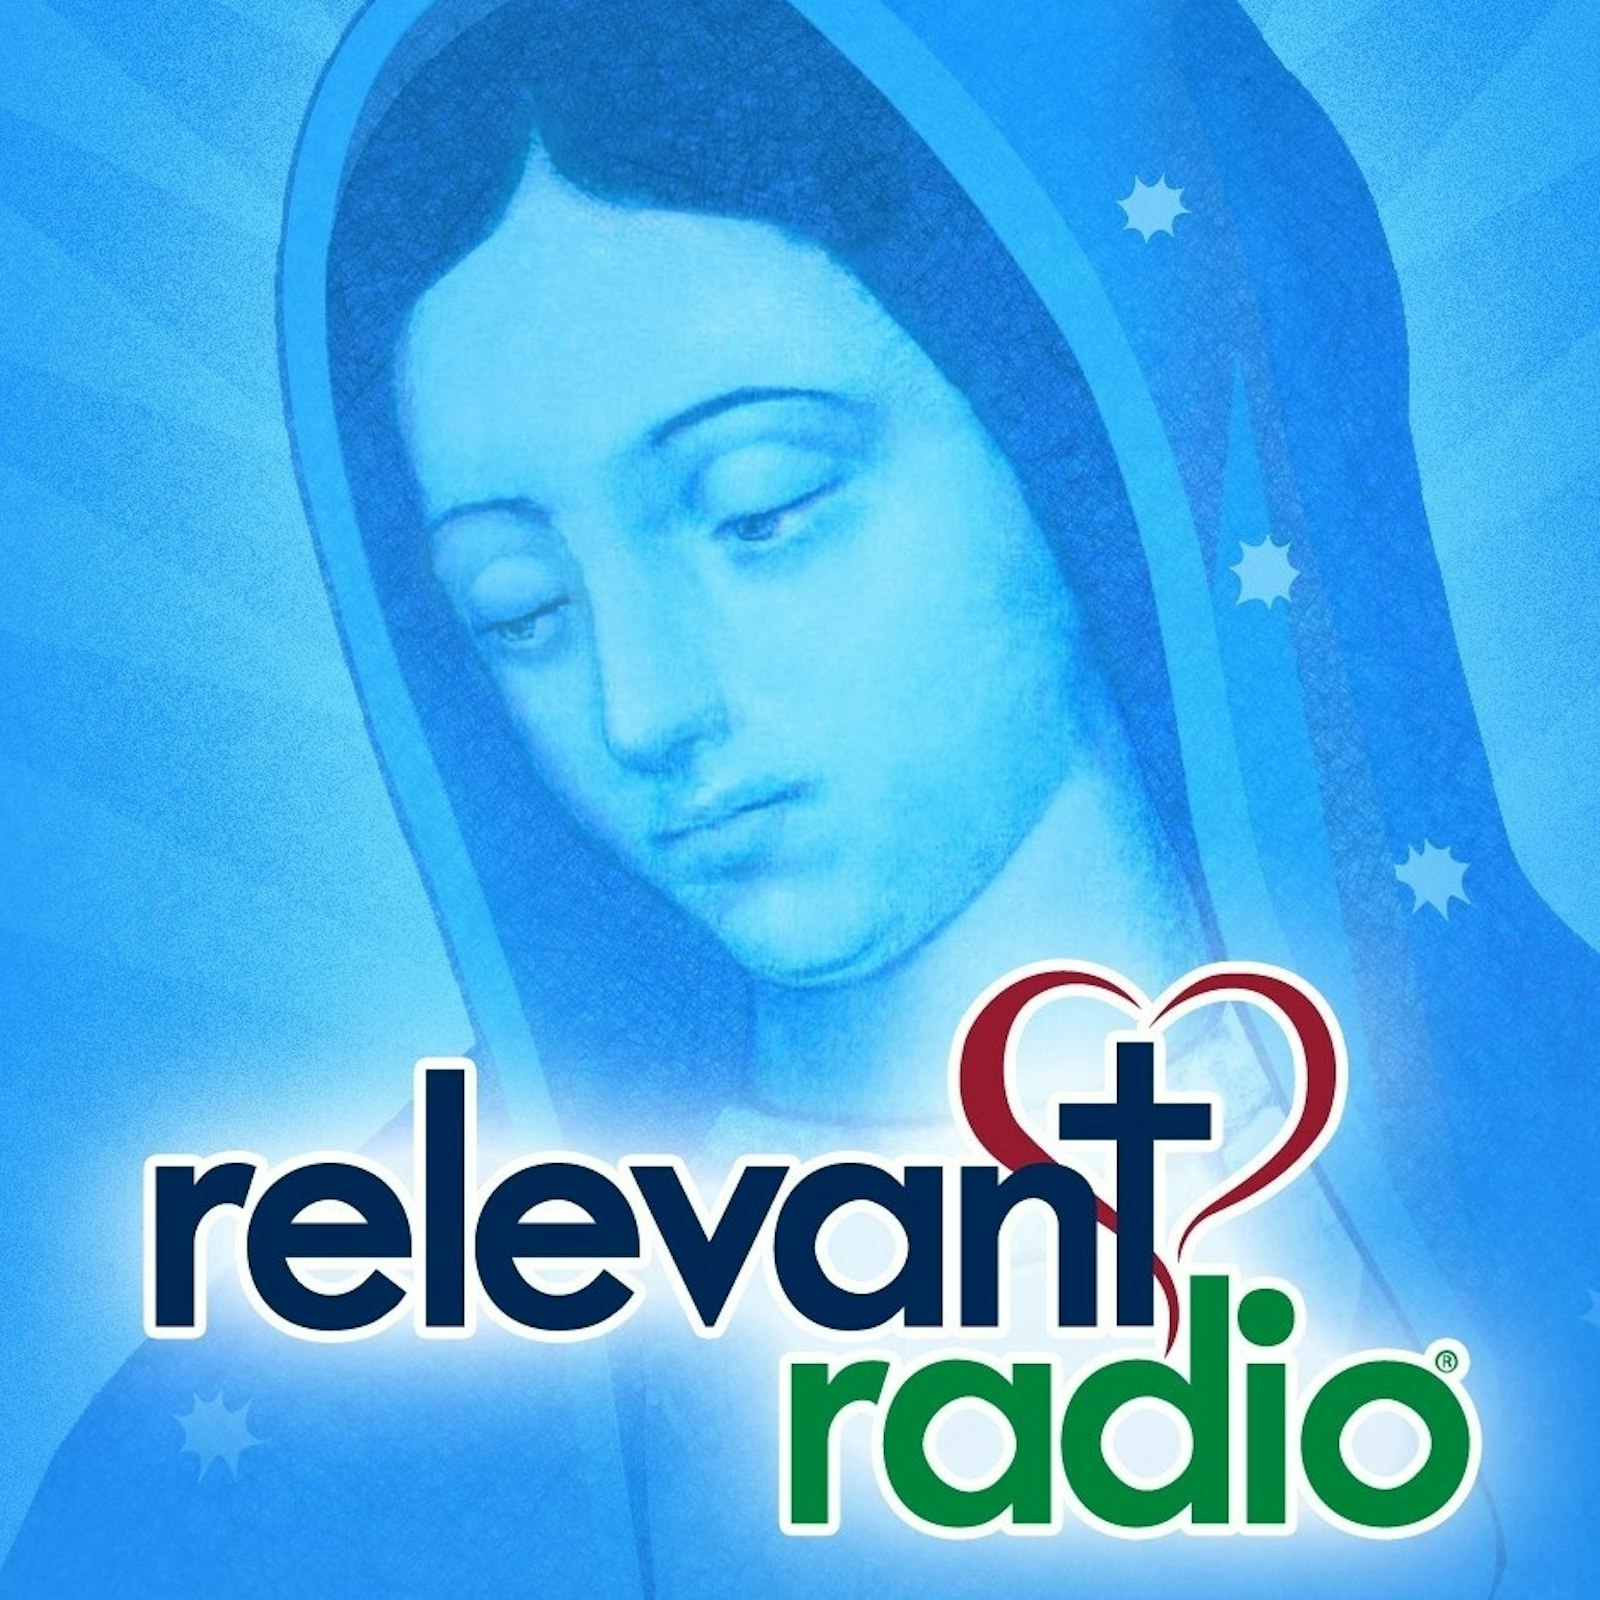 Relevant Radio is on the air in 77 of the top 100 markets in the United States, Fr. Hoffman said, with a goal to reach all 100 markets by 2025.